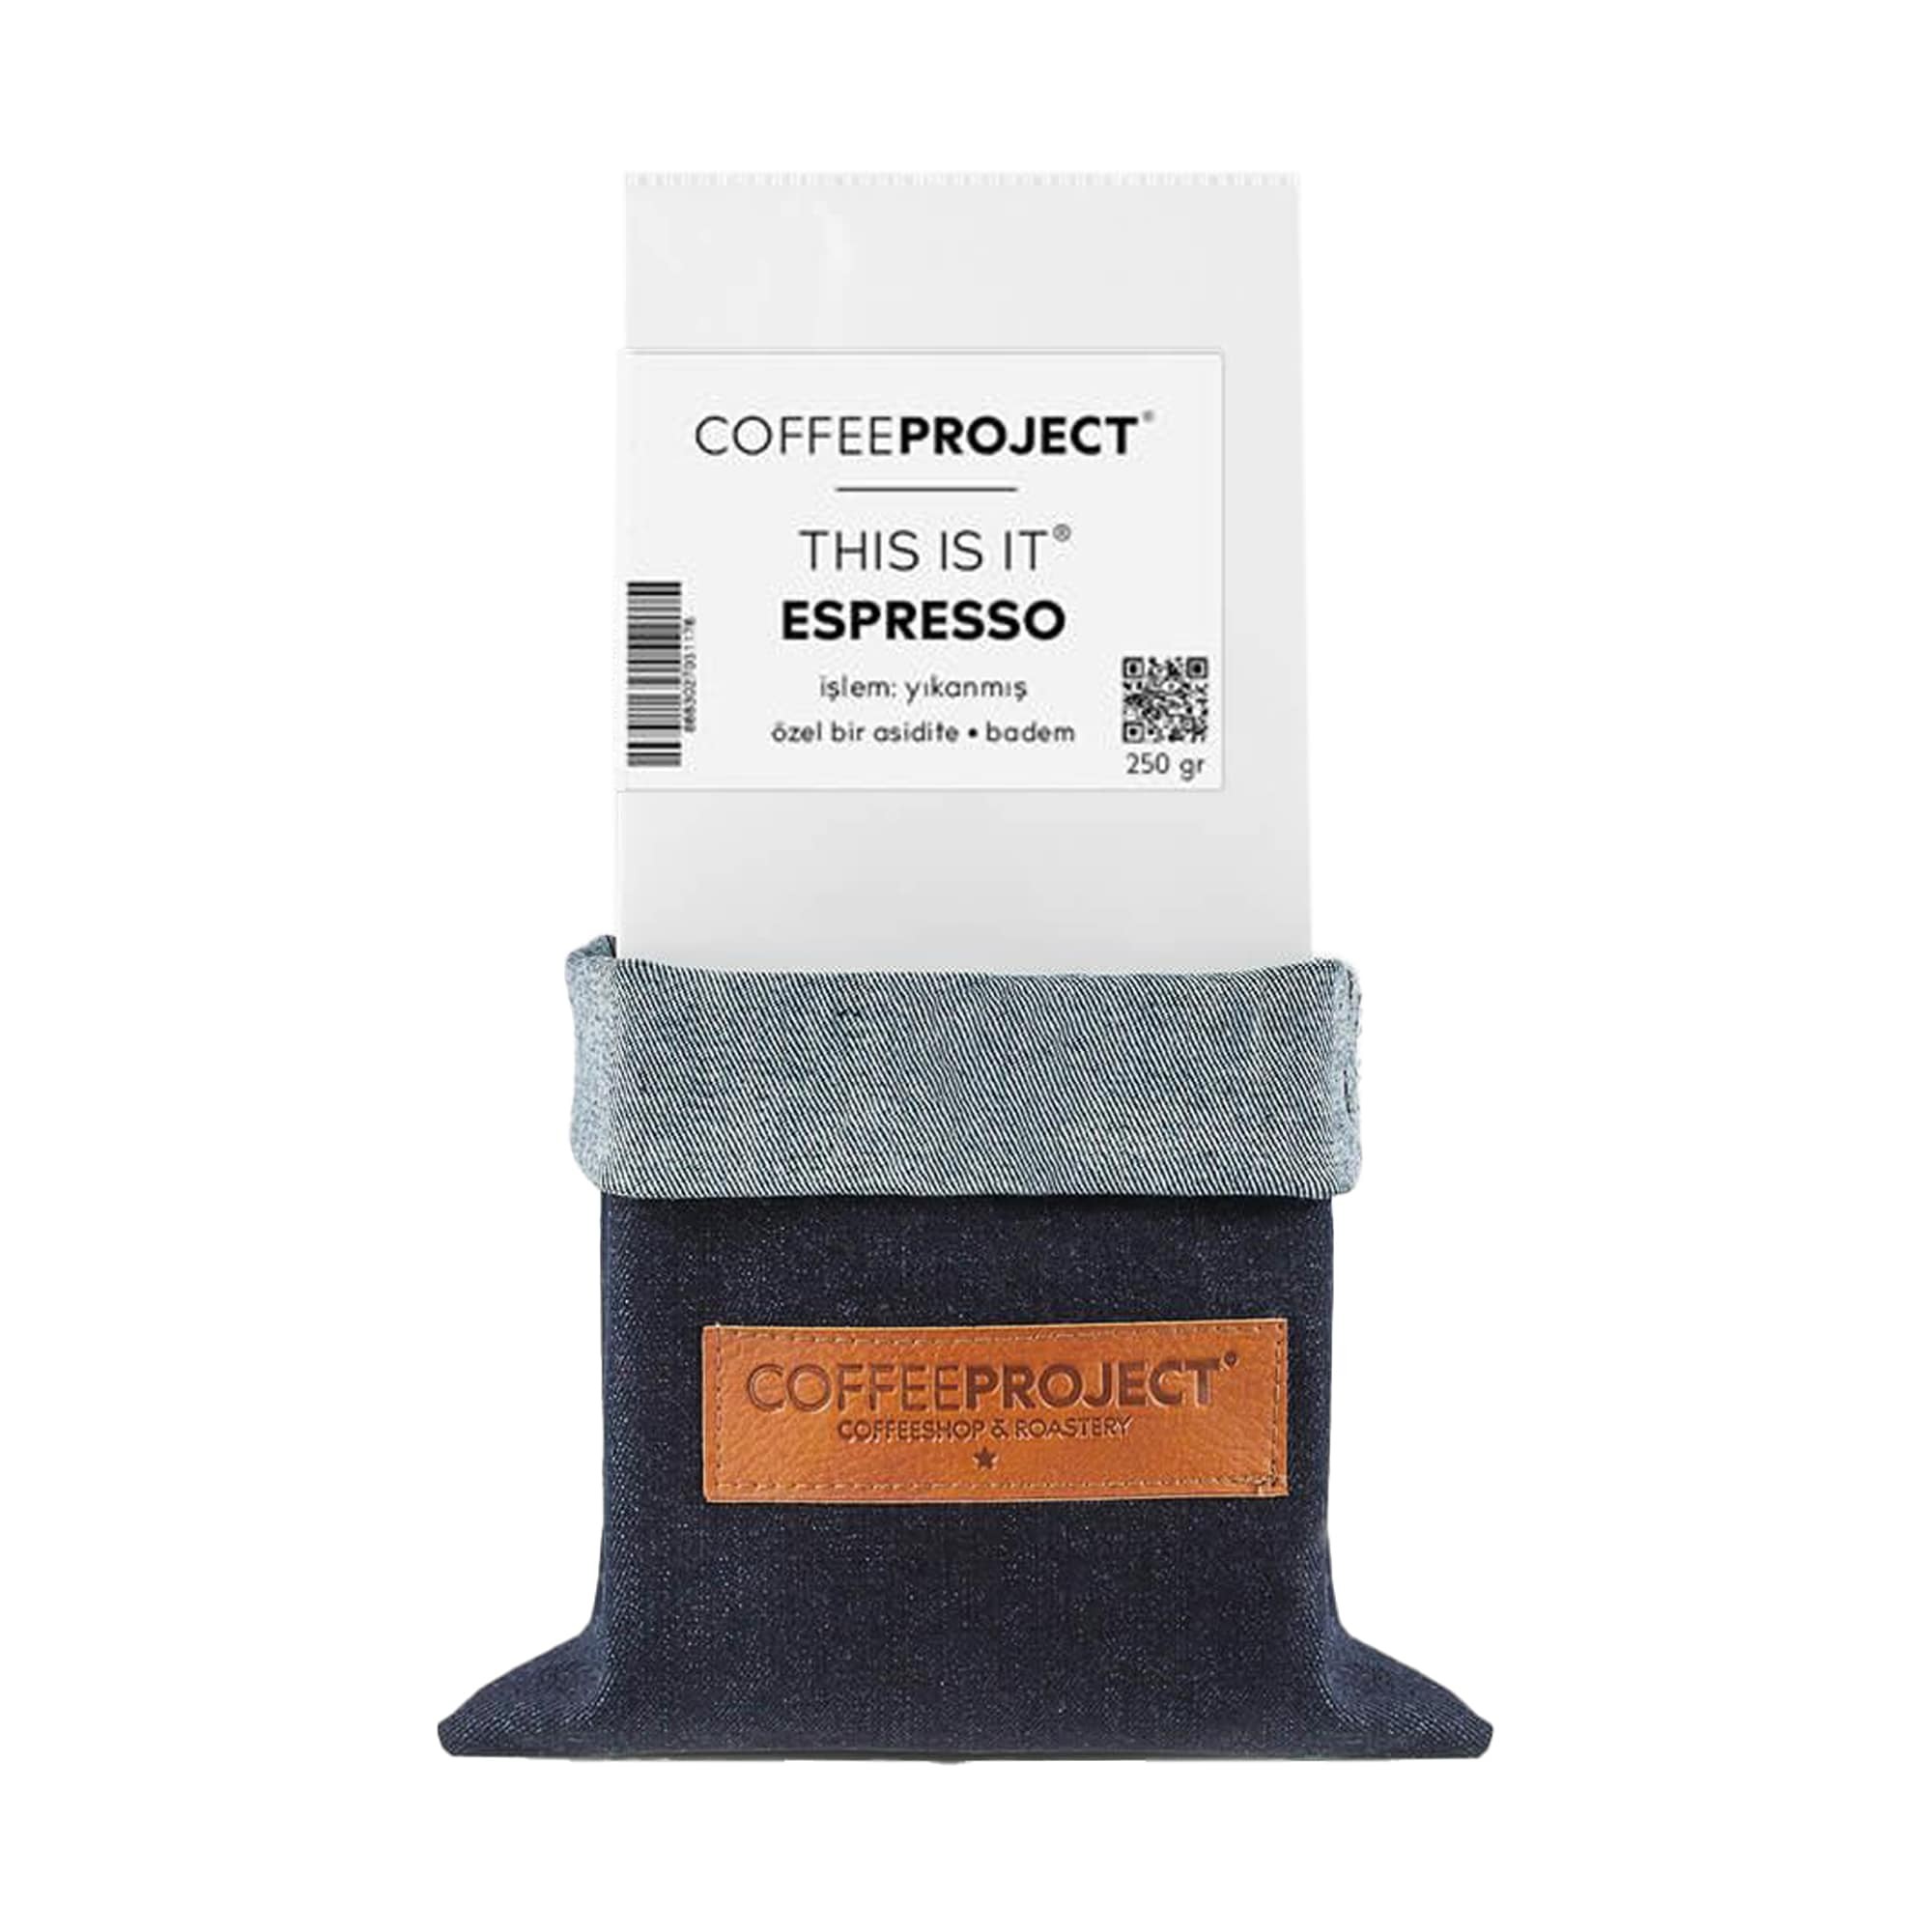 250 gr Espresso Coffee - This is it